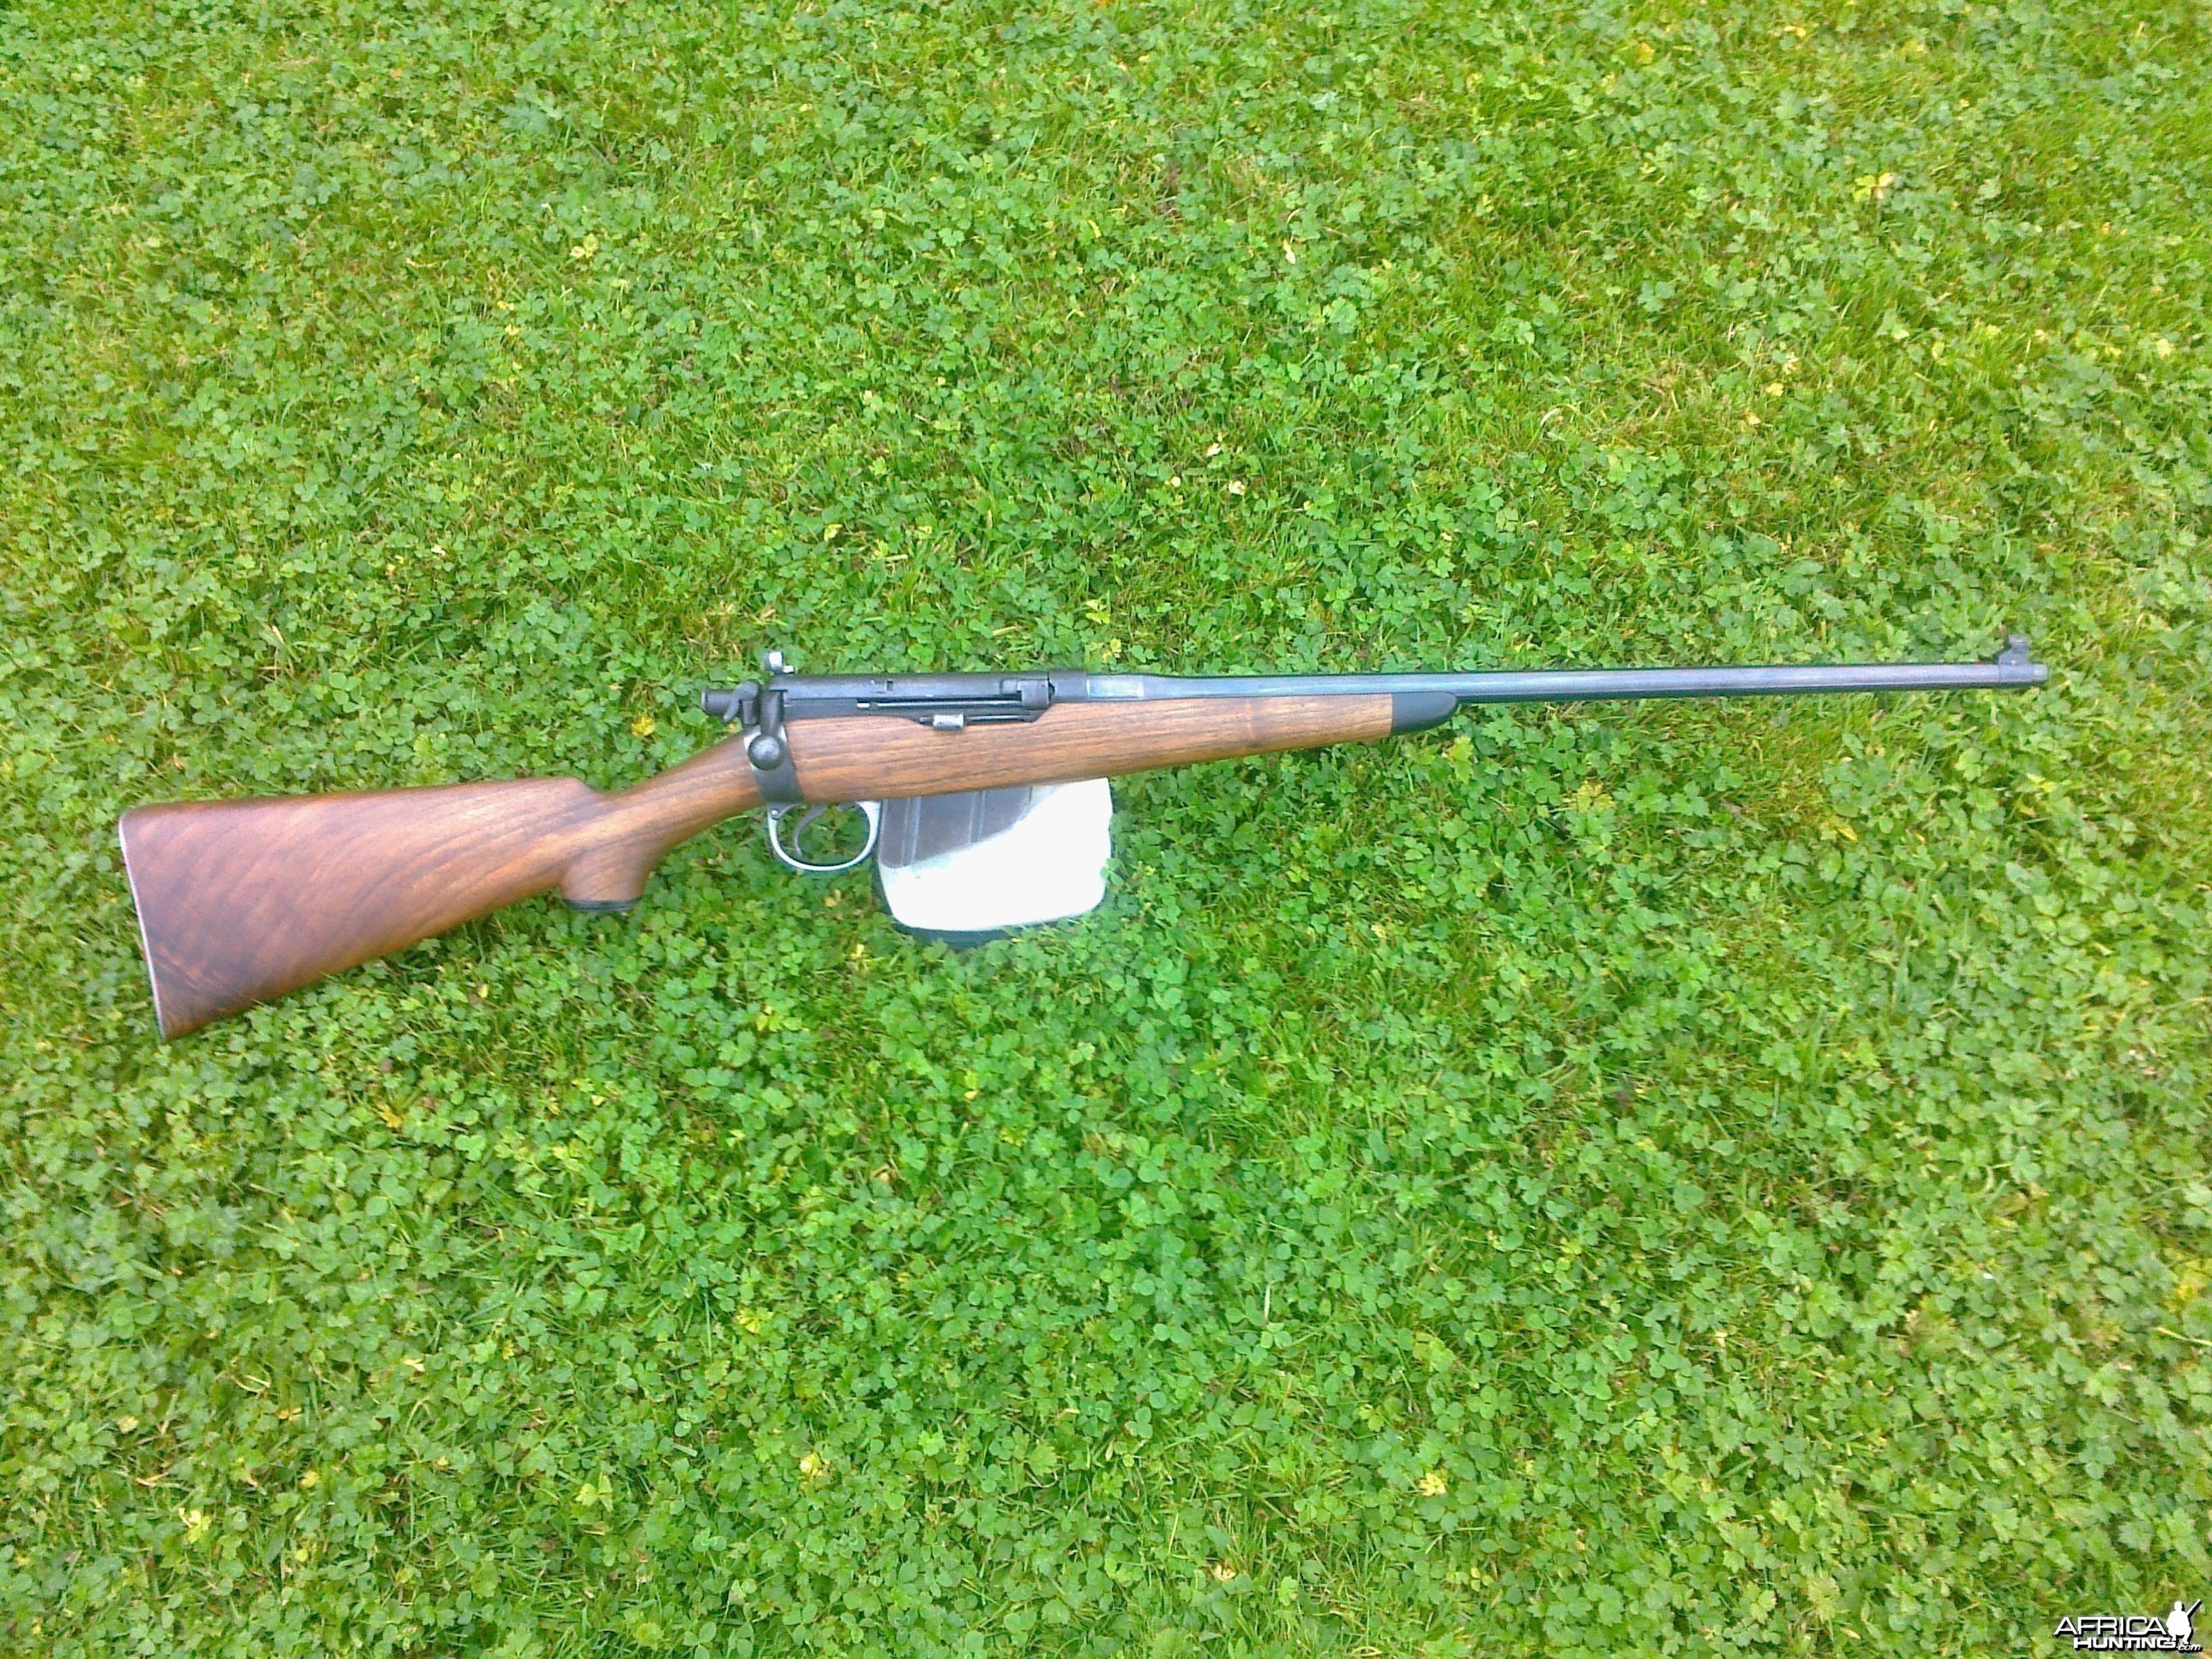 The 303 Lee Enfield sporting rifle I built